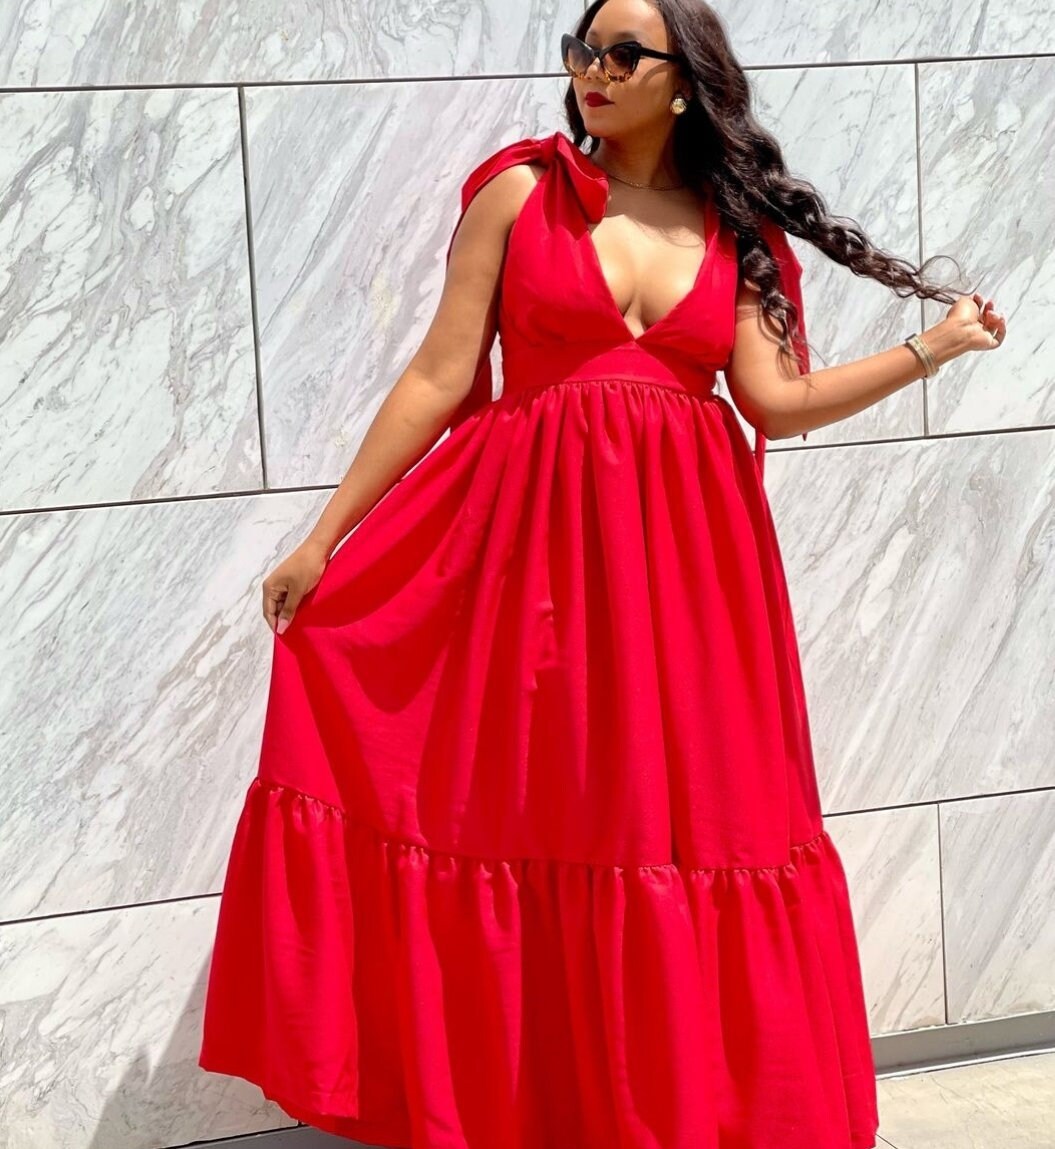 Dolcezza Sweetheart Neckline Maxi Dress in Red